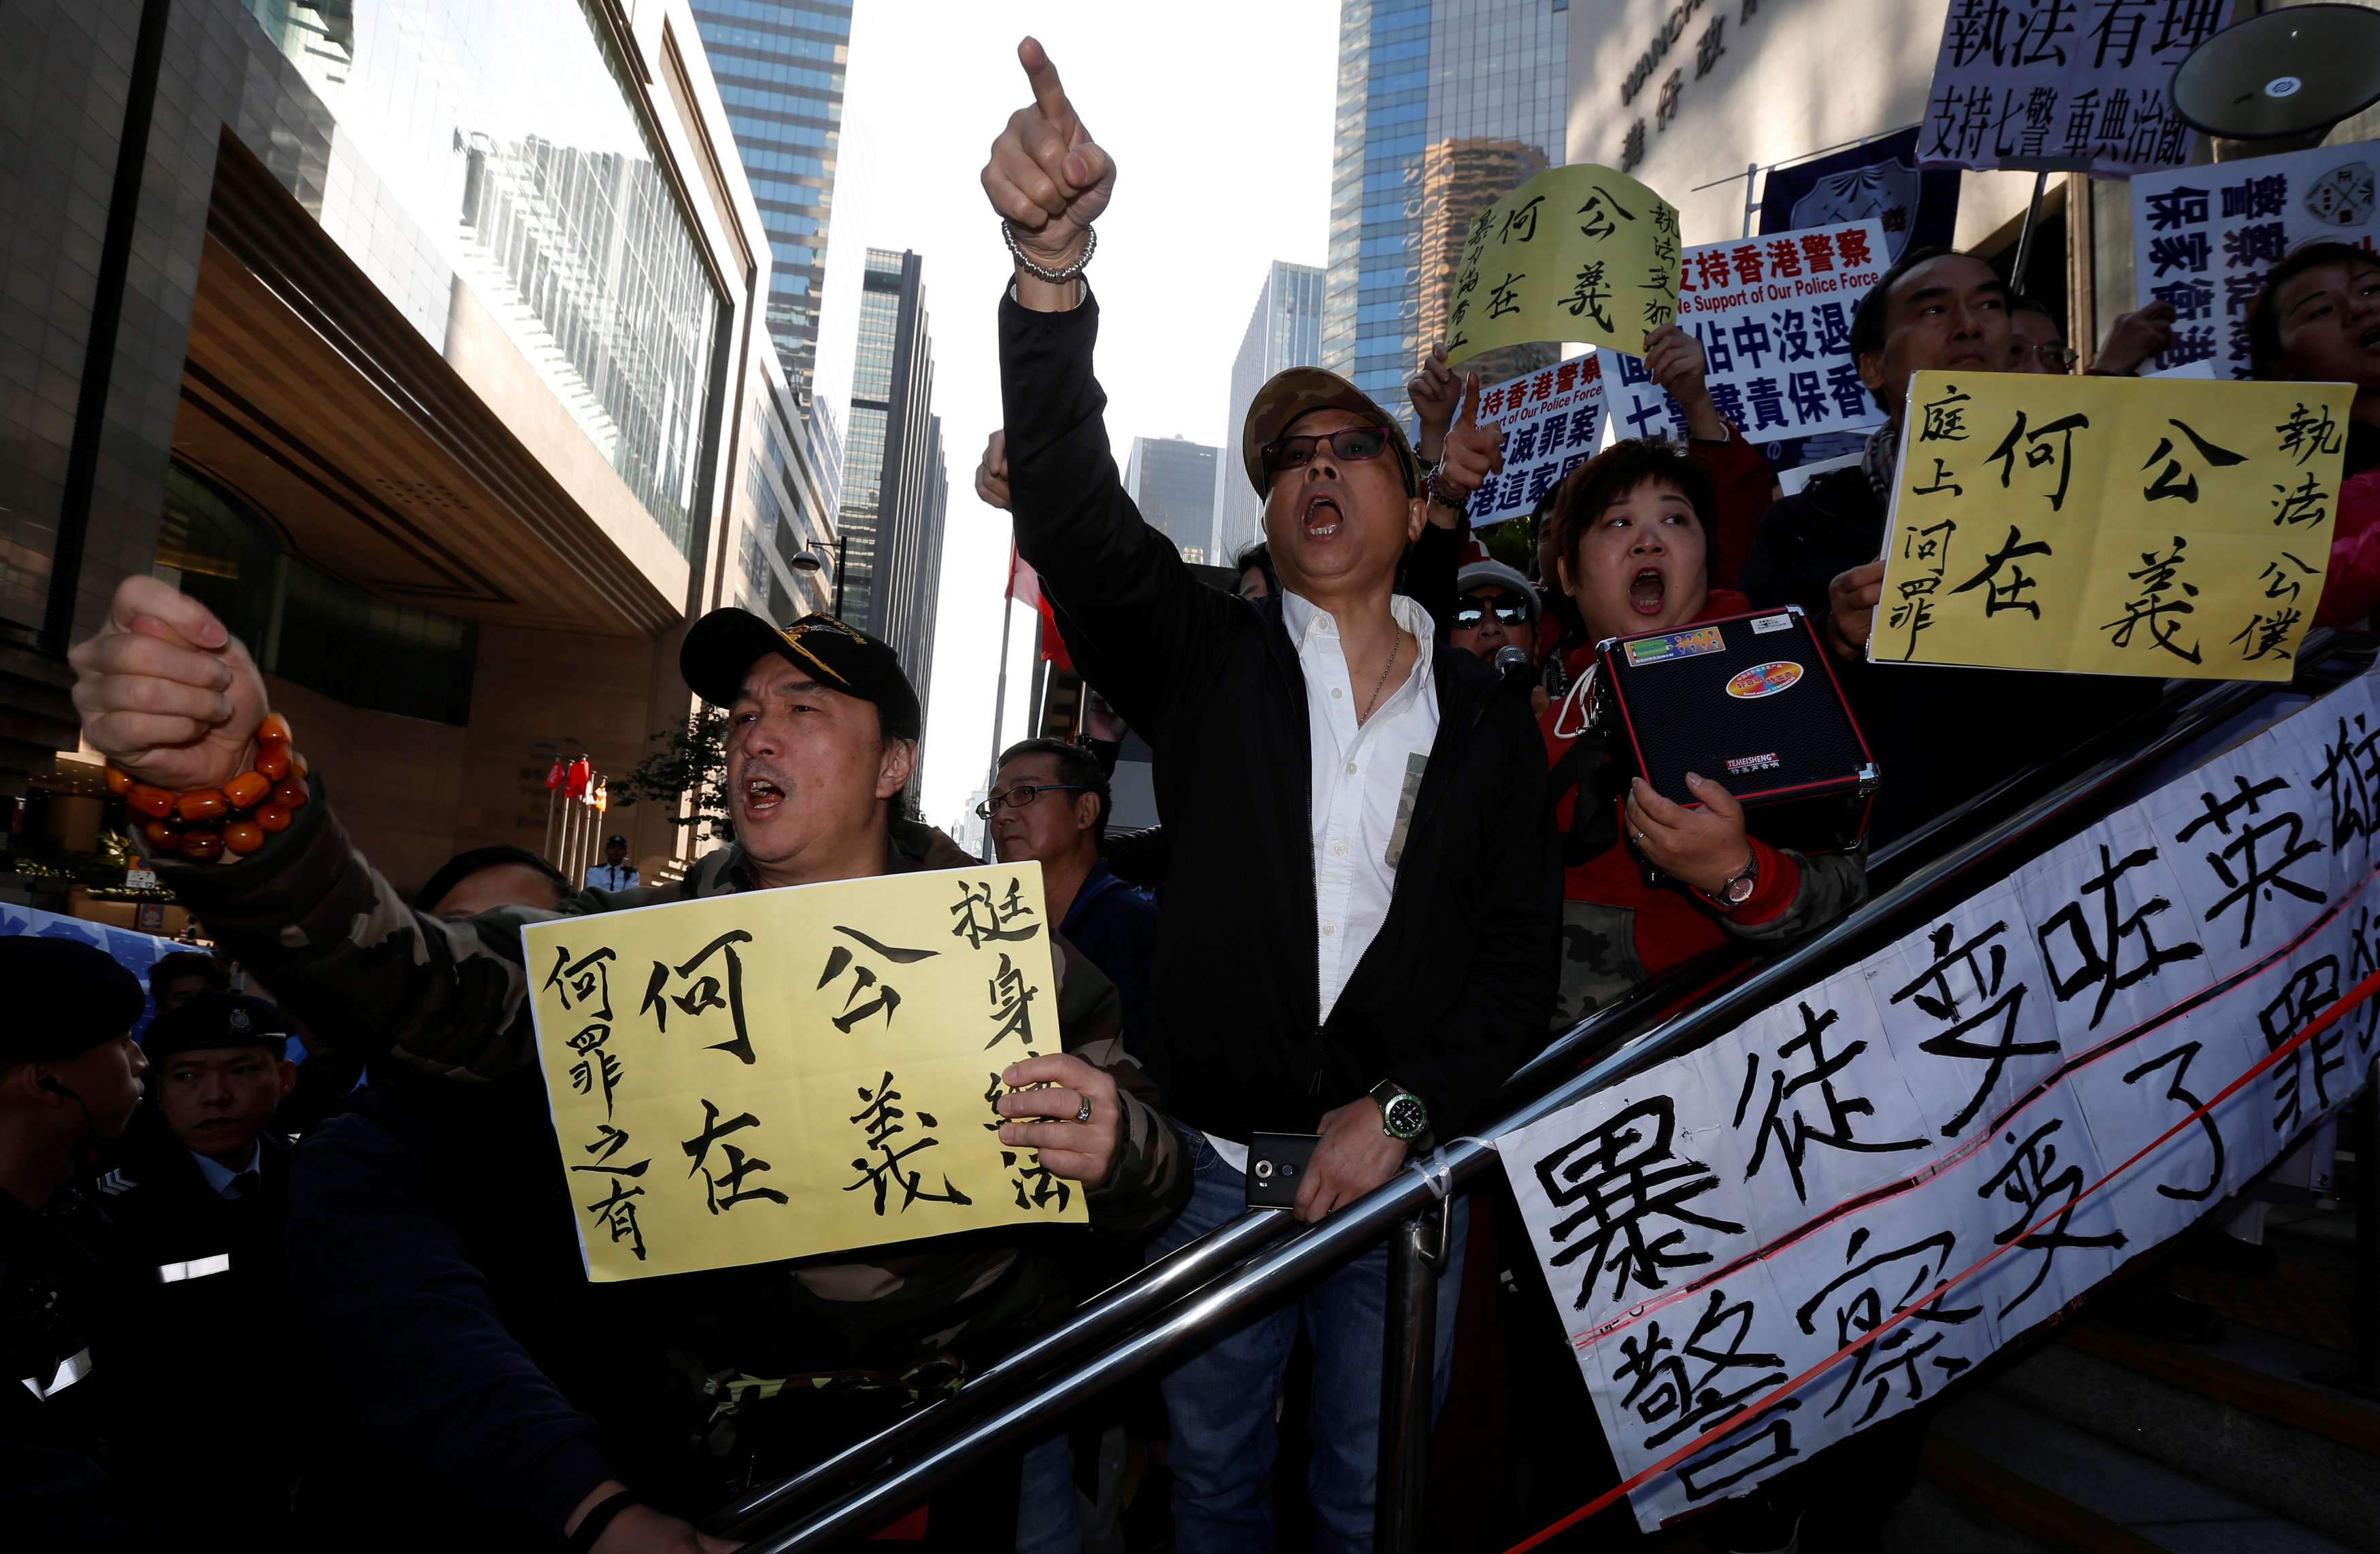 Supporters of police officers argue with pro-democracy protesters outside a court where seven police officers were convicted of kicking and punching activist Ken Tsang during an Occupy protest more than two years ago. Photo: Reuters